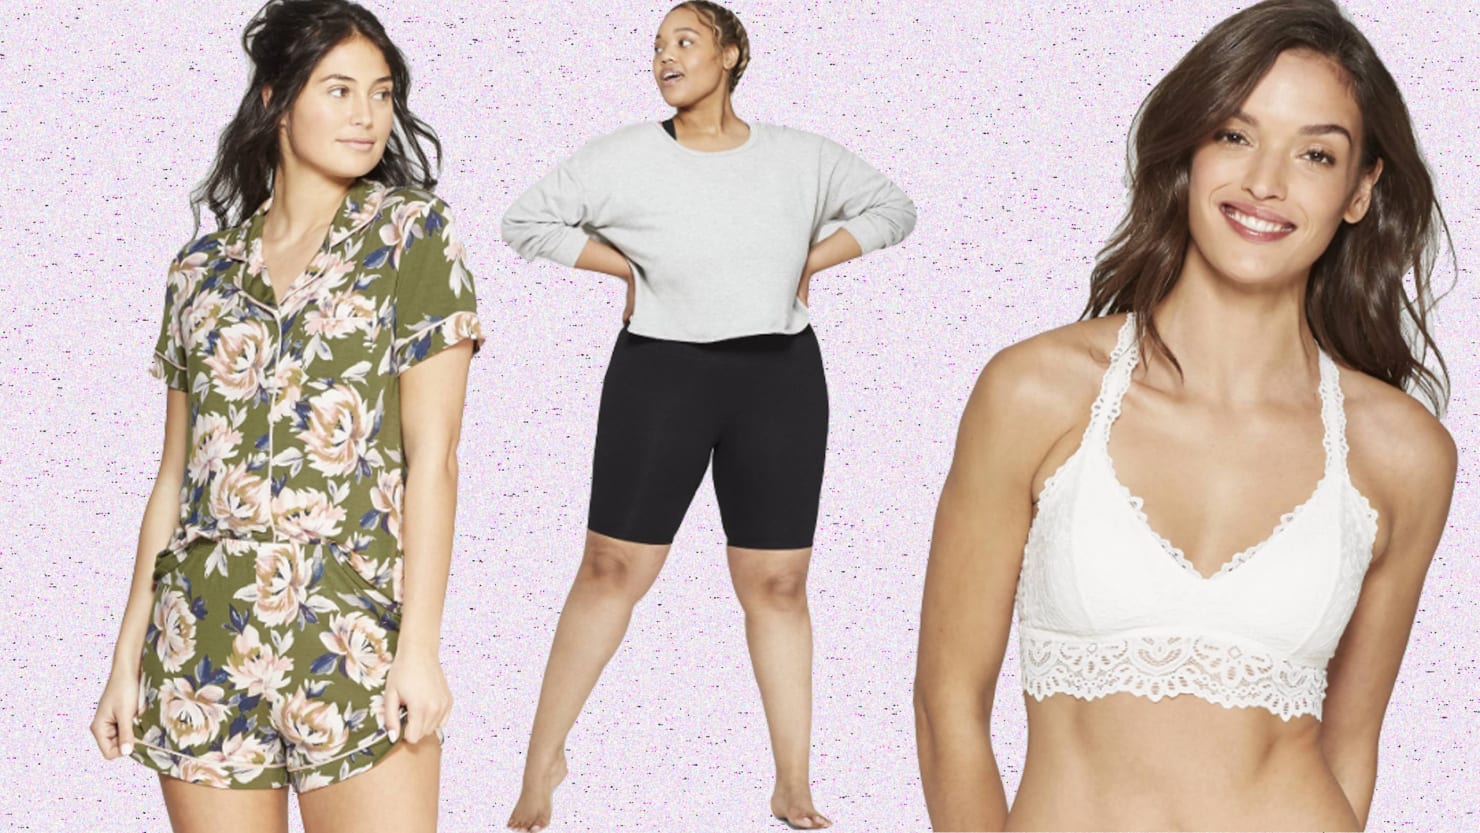 Target Launches Three New Size-Inclusive Lingerie and Lounge